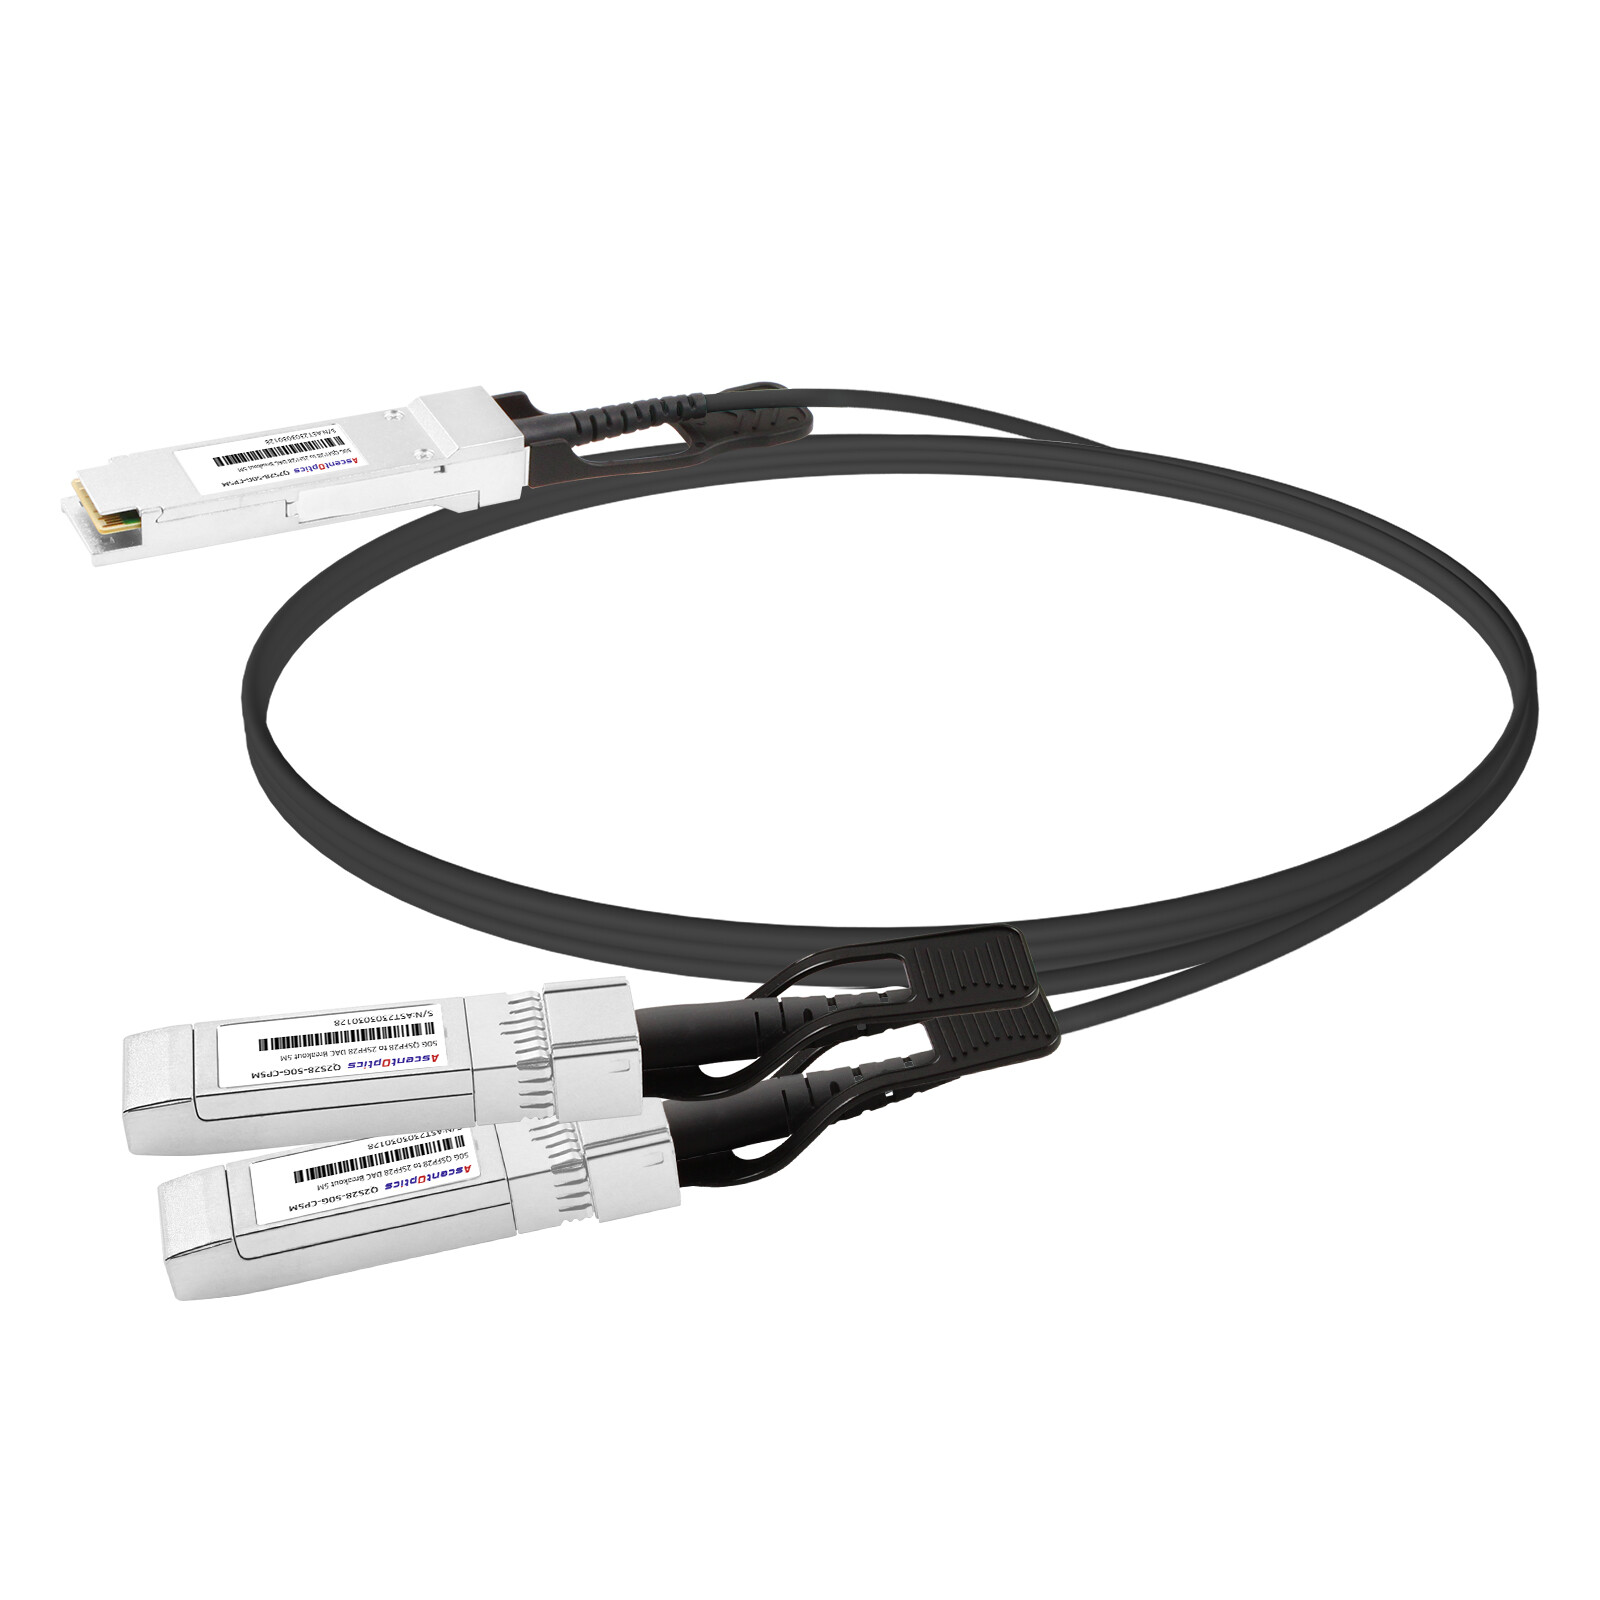 50G QSFP28 to 2x 25G SFP28 Copper Breakout Cable,5 Meters,Passive